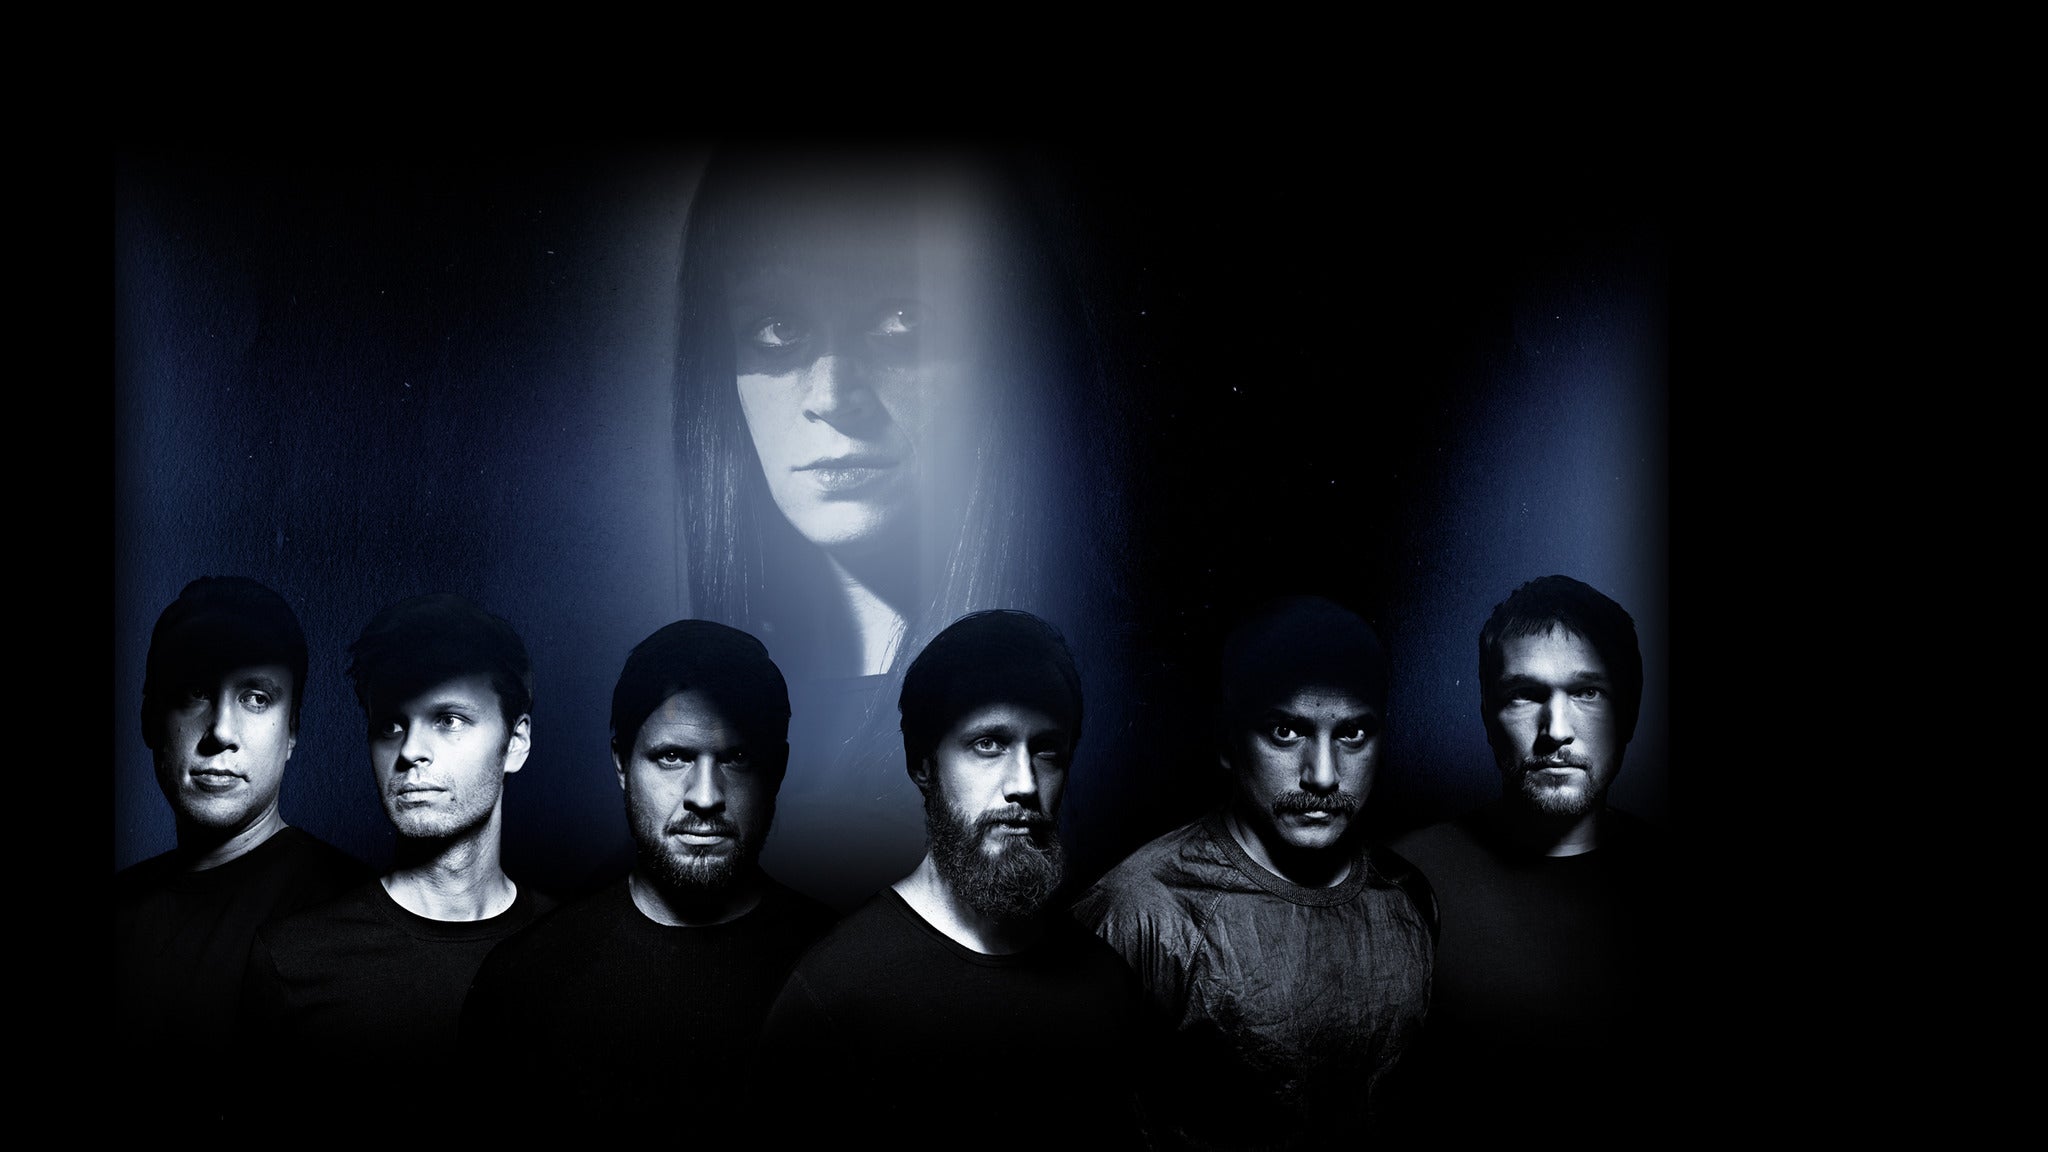 CULT OF LUNA with Julie Christmas in New York promo photo for Live Nation Mobile presale offer code